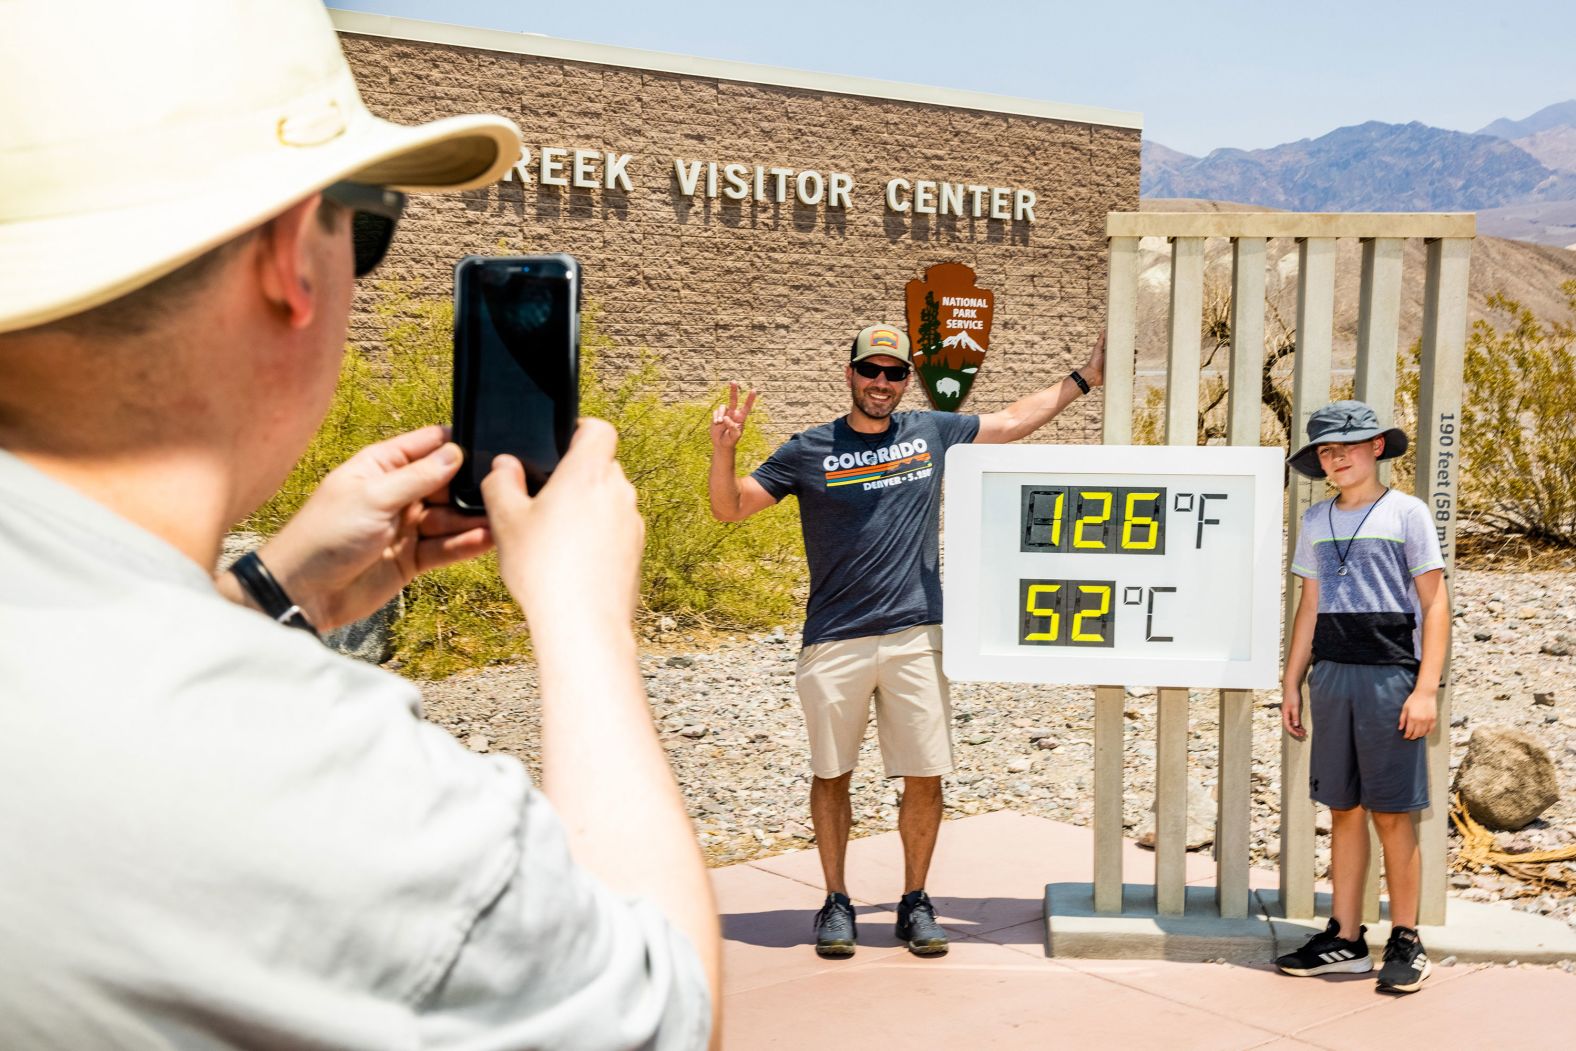 Visitors take photos in front of a thermometer in July 2021, at Death Valley National Park in Death Valley, California. Death Valley is known to be a hot place, but on July 9 <a href="https://www.cnn.com/2021/07/11/weather/weather-death-valley-heat-record-california-weekend/index.html" target="_blank">it hit 130 degrees Fahrenheit</a> for only the fifth time in recorded history.